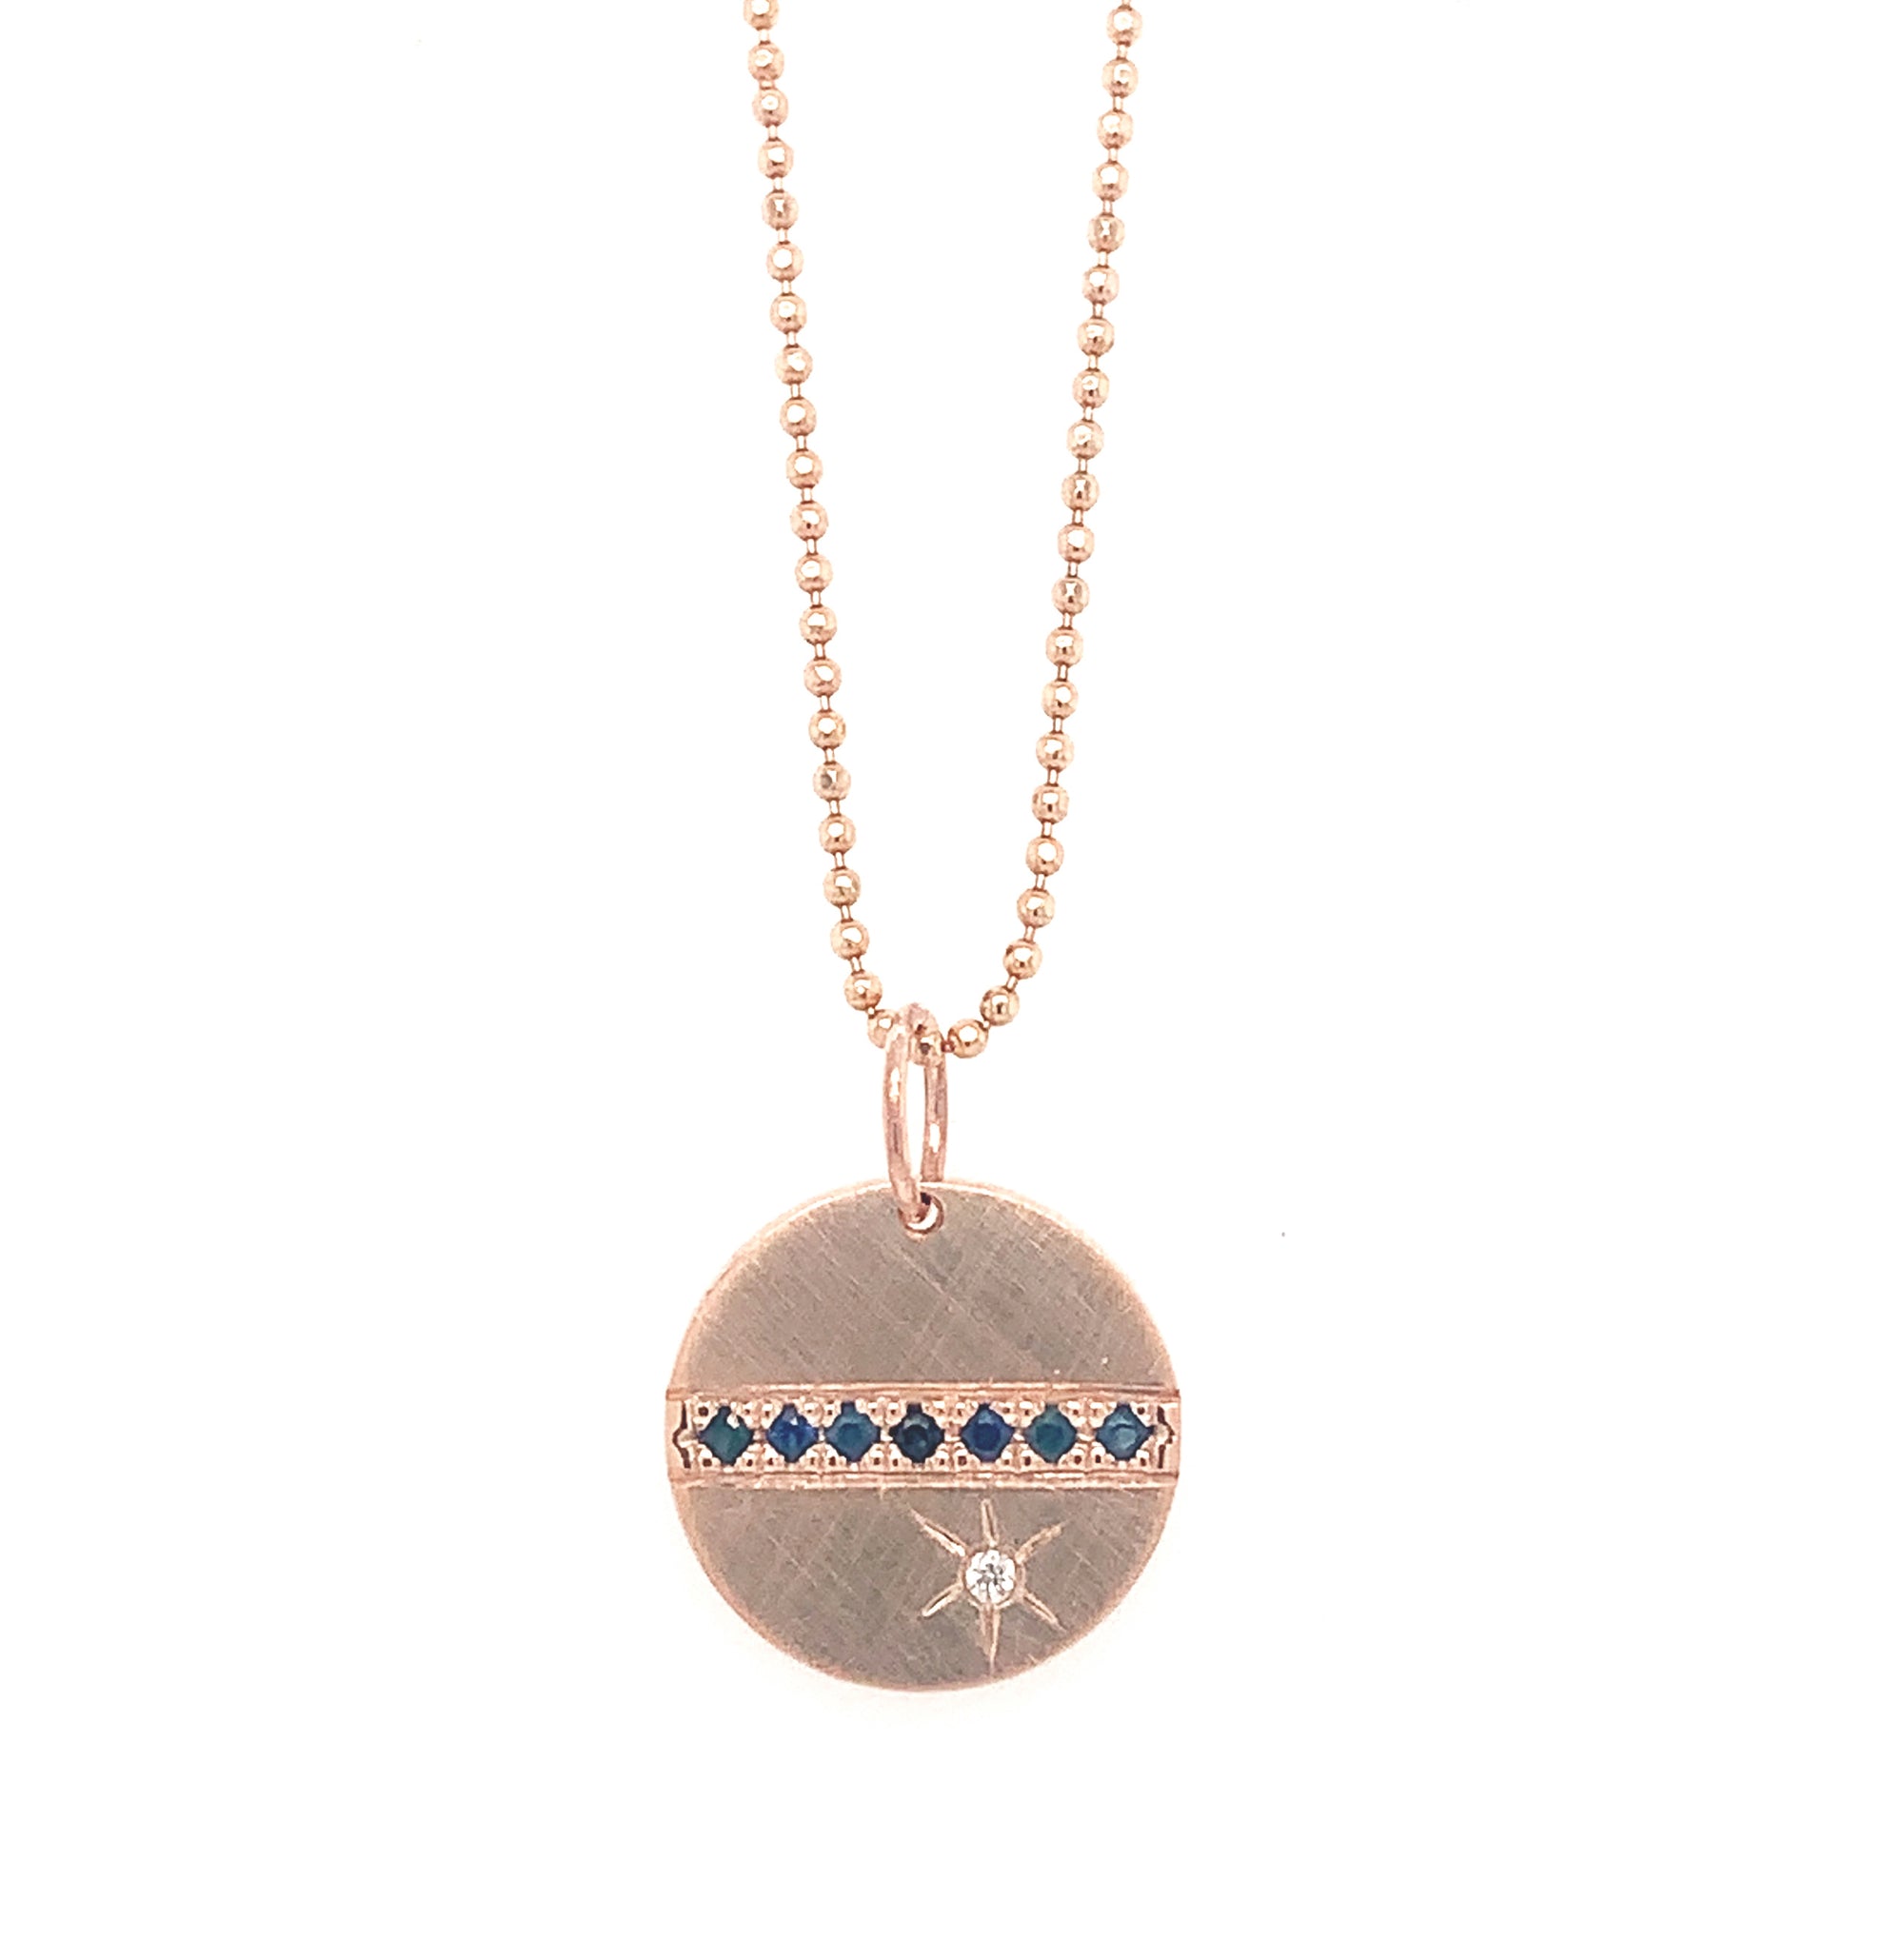 14k rose gold HALA charm with blue sapphires